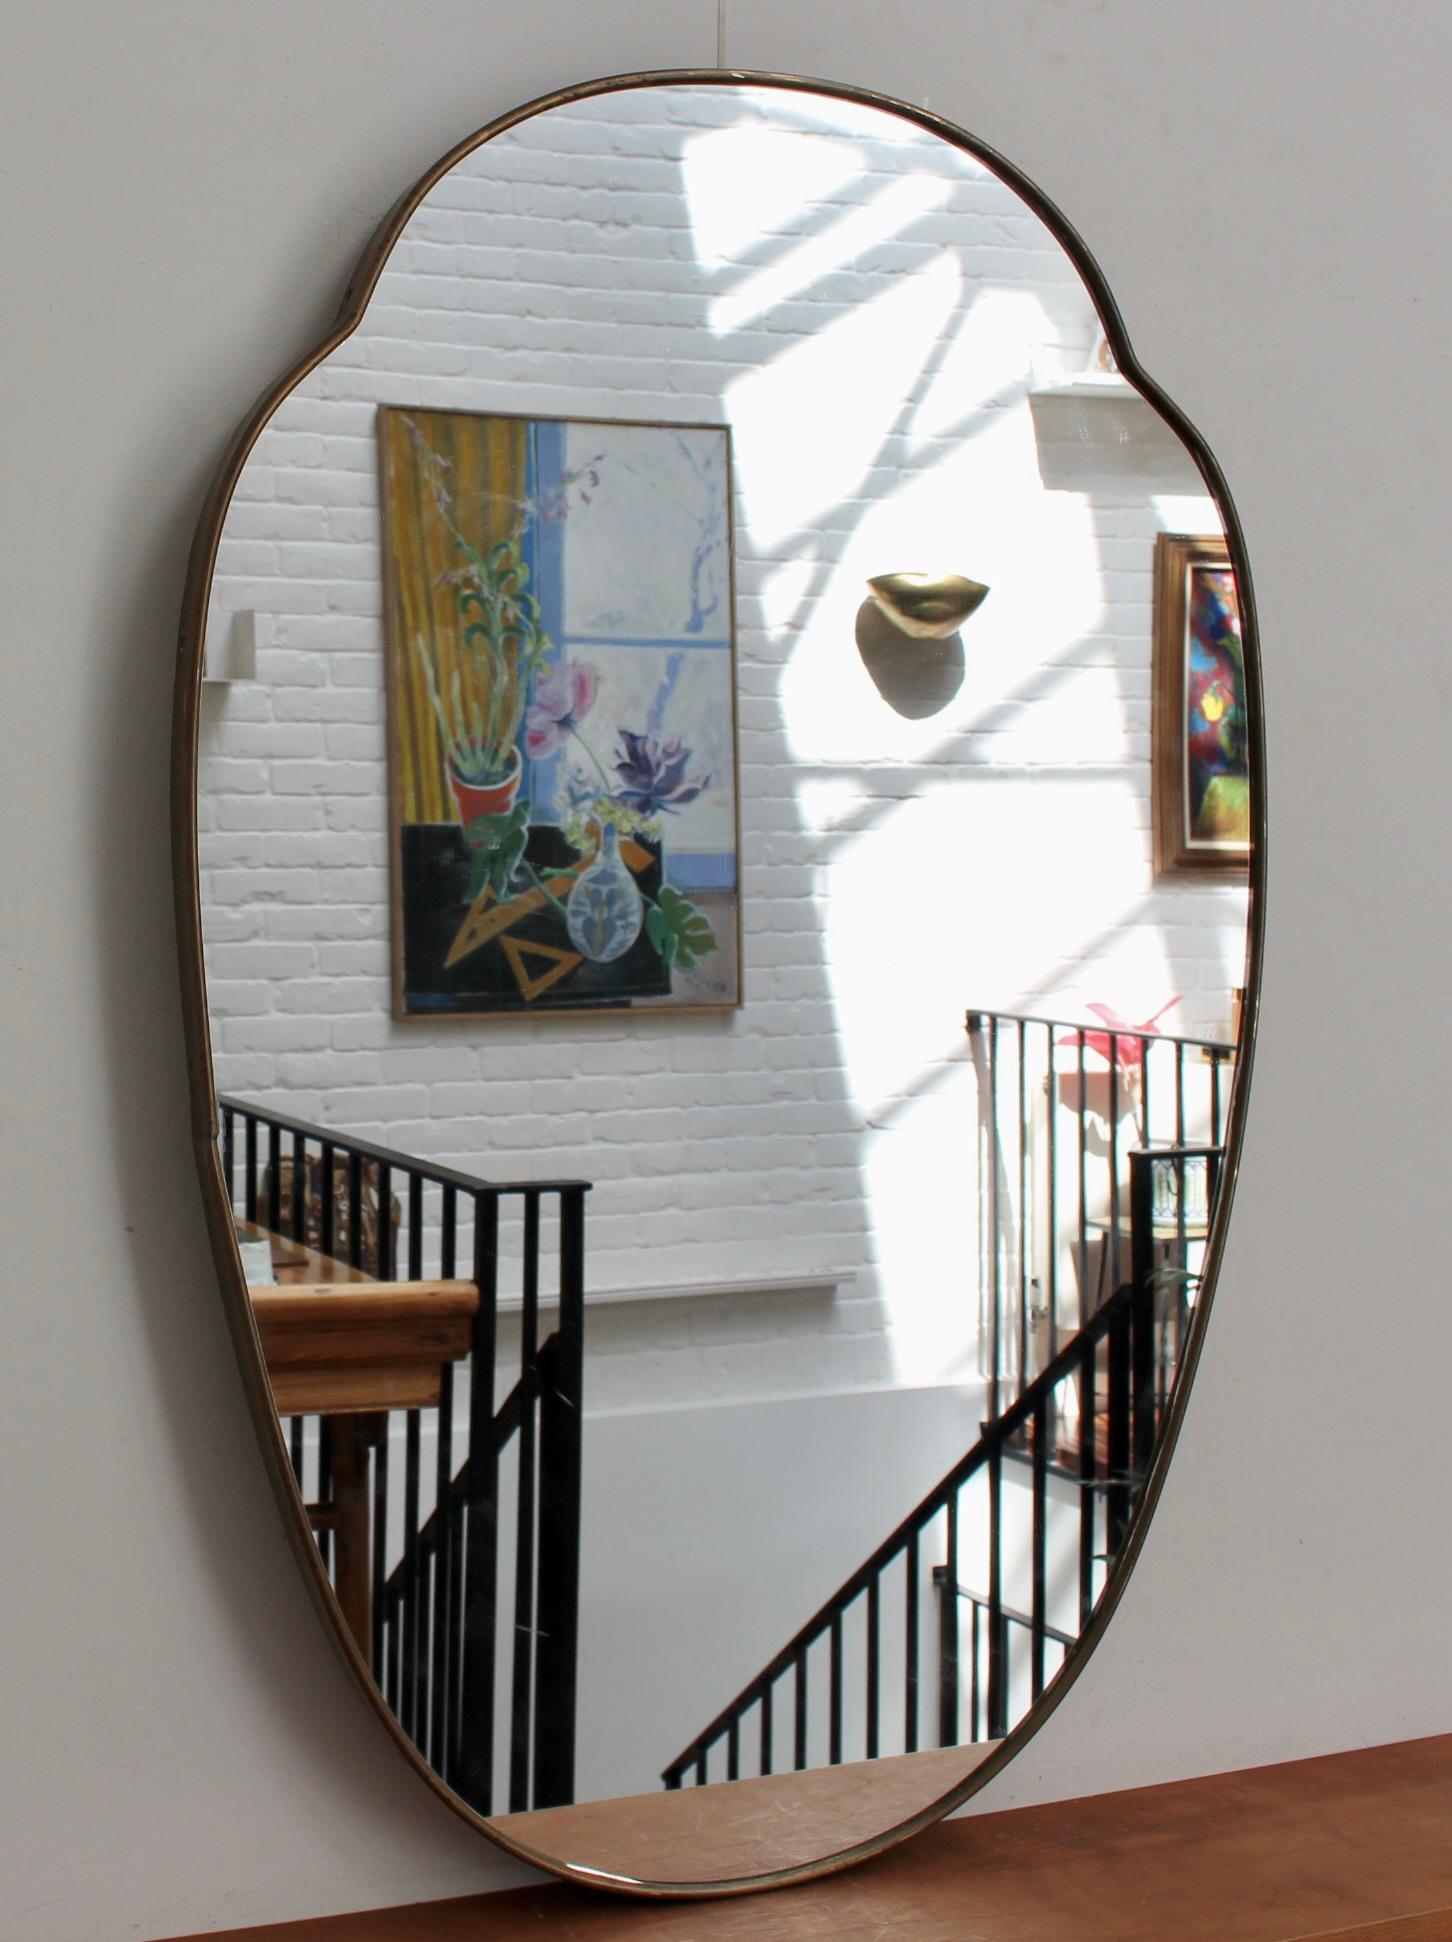 Mid-century Italian wall mirror with brass frame (circa 1960s). The mirror is classically-shaped and distinctive in a Modern style. It is in good overall condition. A beautiful patina has developed on the brass frame. The mirror glass has minor